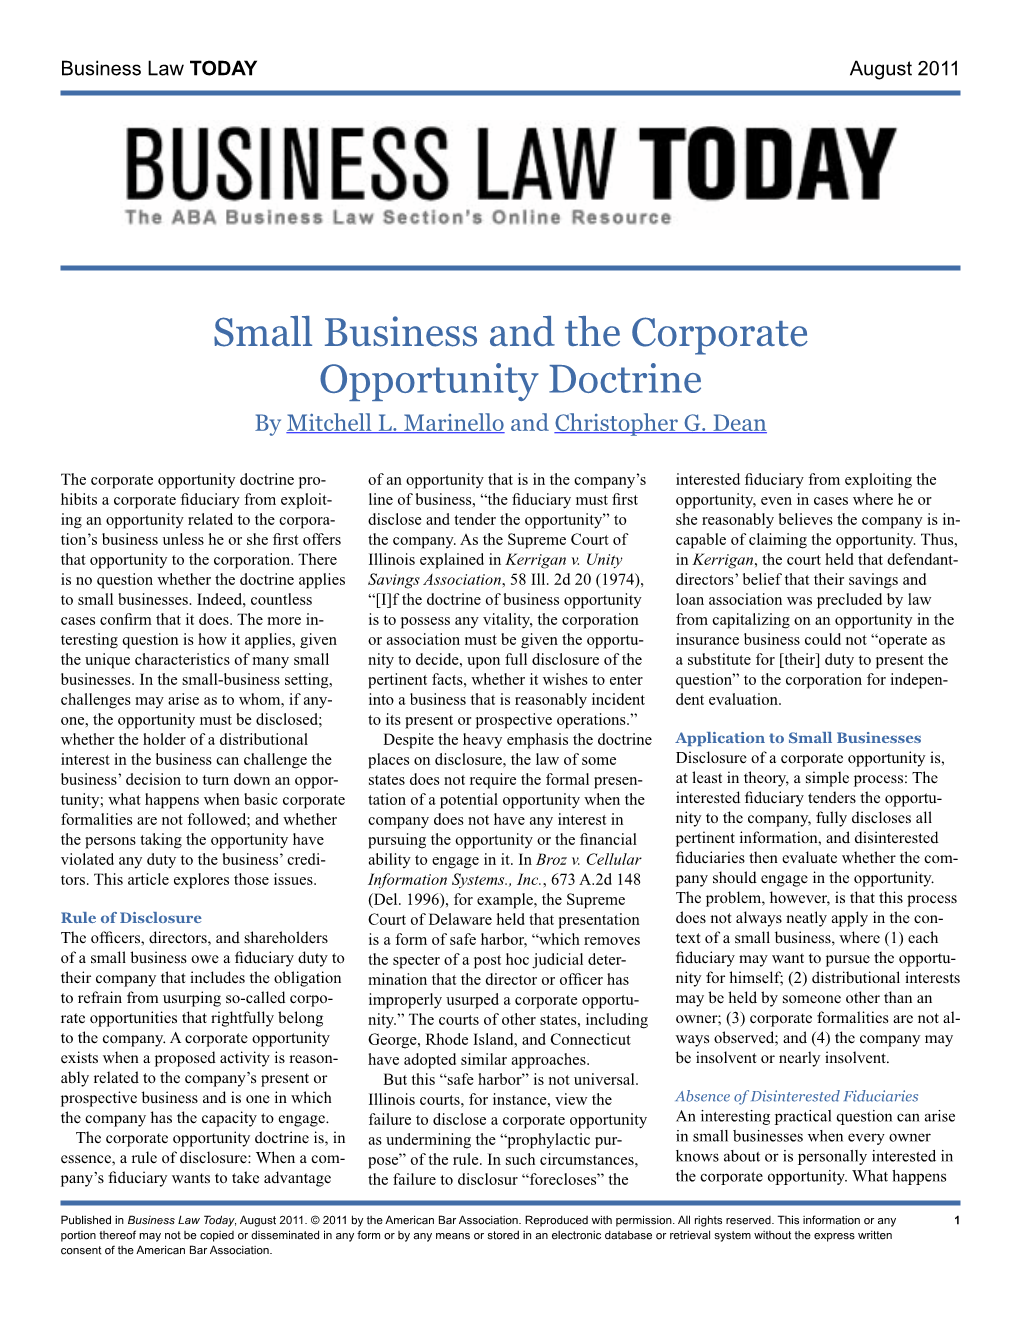 Small Business and the Corporate Opportunity Doctrine by Mitchell L